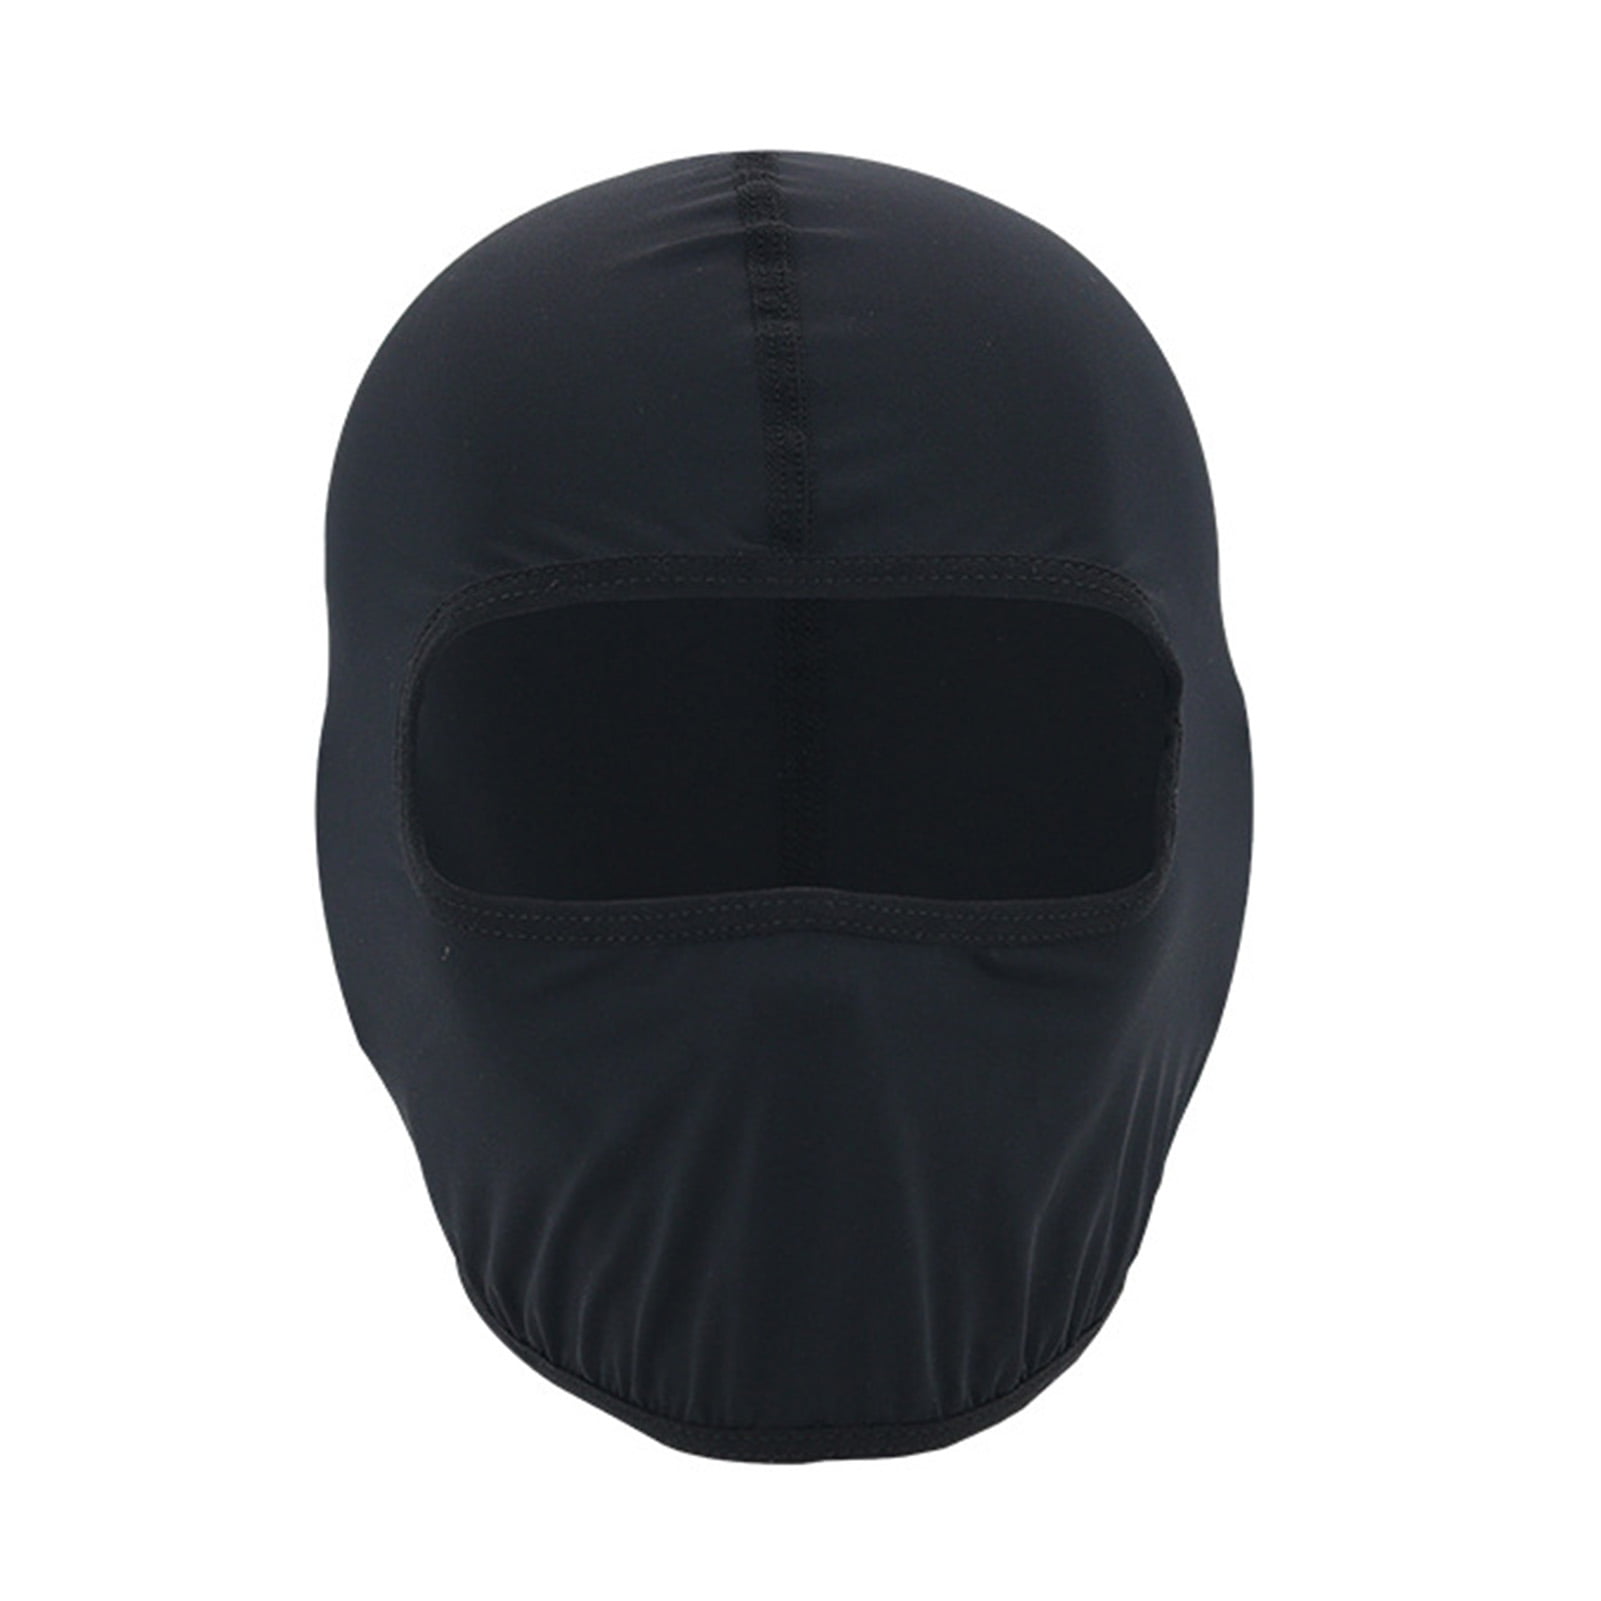 Details about   Balaclava Full Face Mask Windproof UV Protection Helmet Liner for Outdoor Sports 